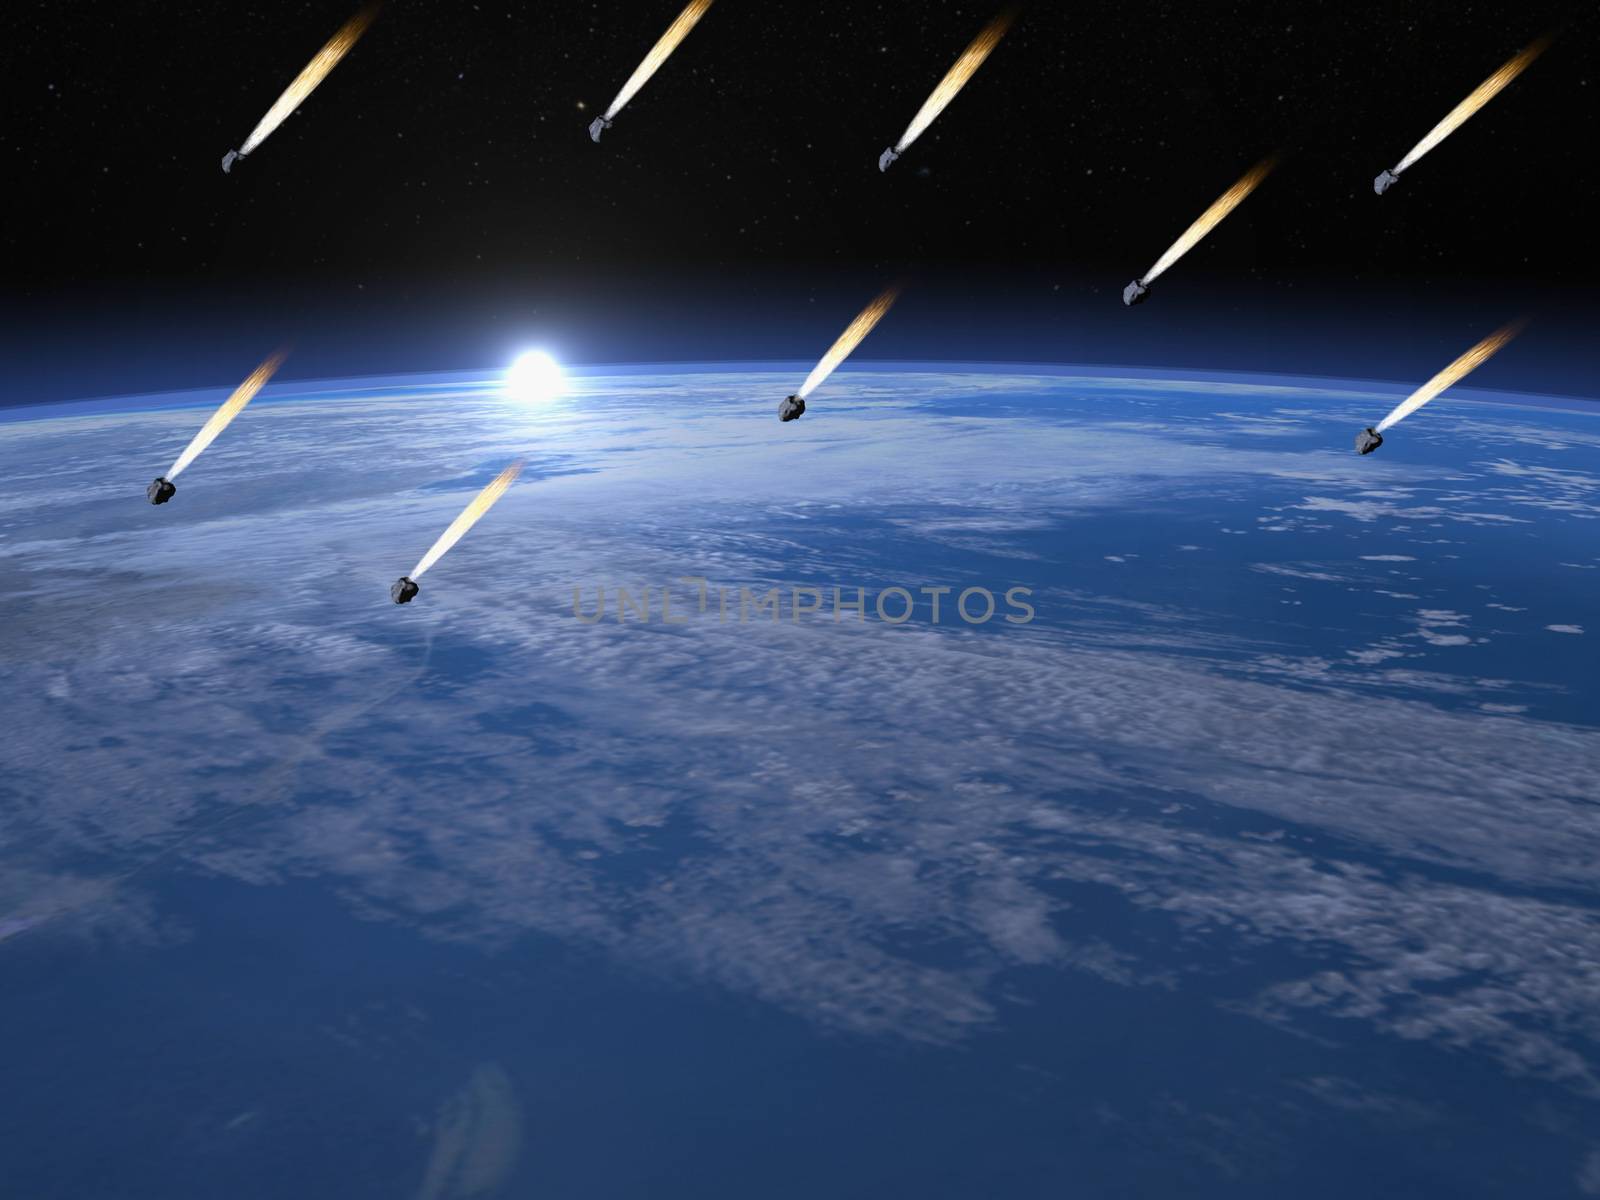 Meteorite shower upon earth by sunrise, elements of this image furnished by NASA - 3D render